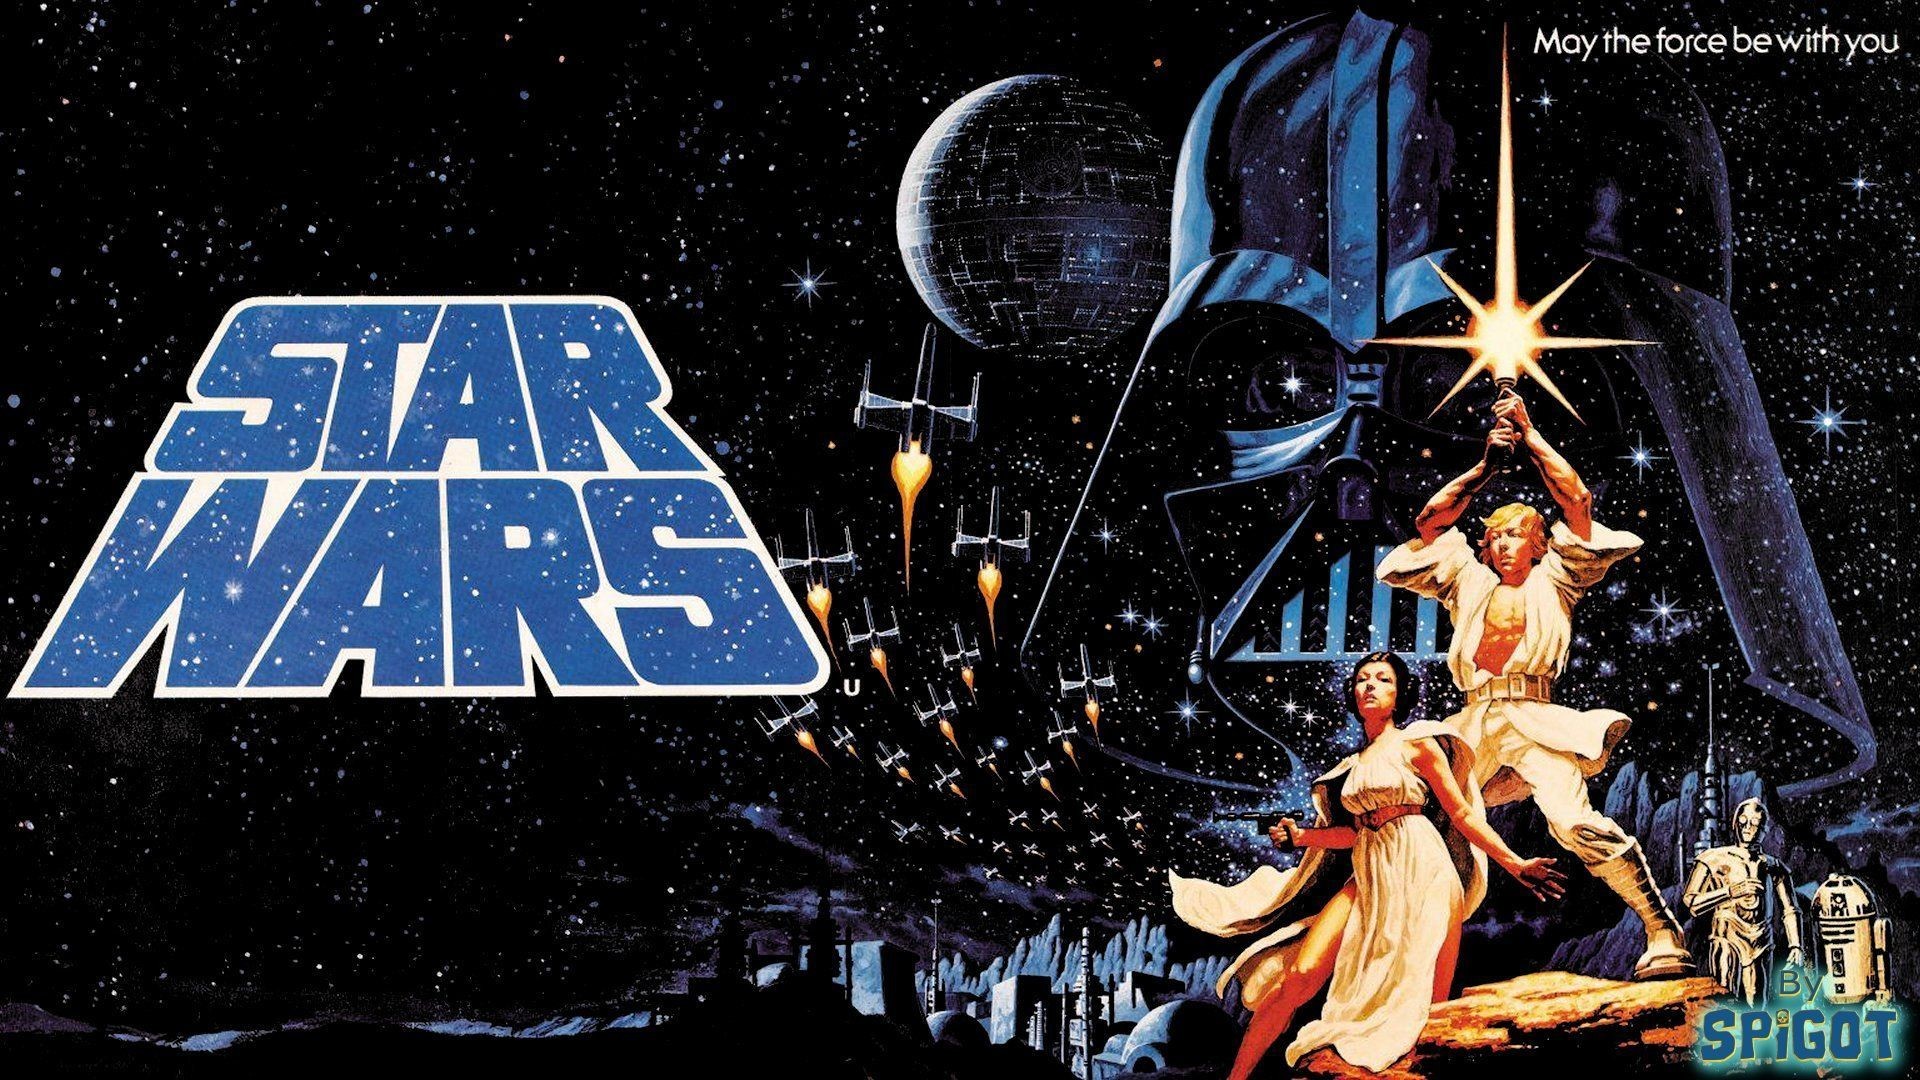 1920x1080 QHD Star Wars wallpapers AndroidGuys